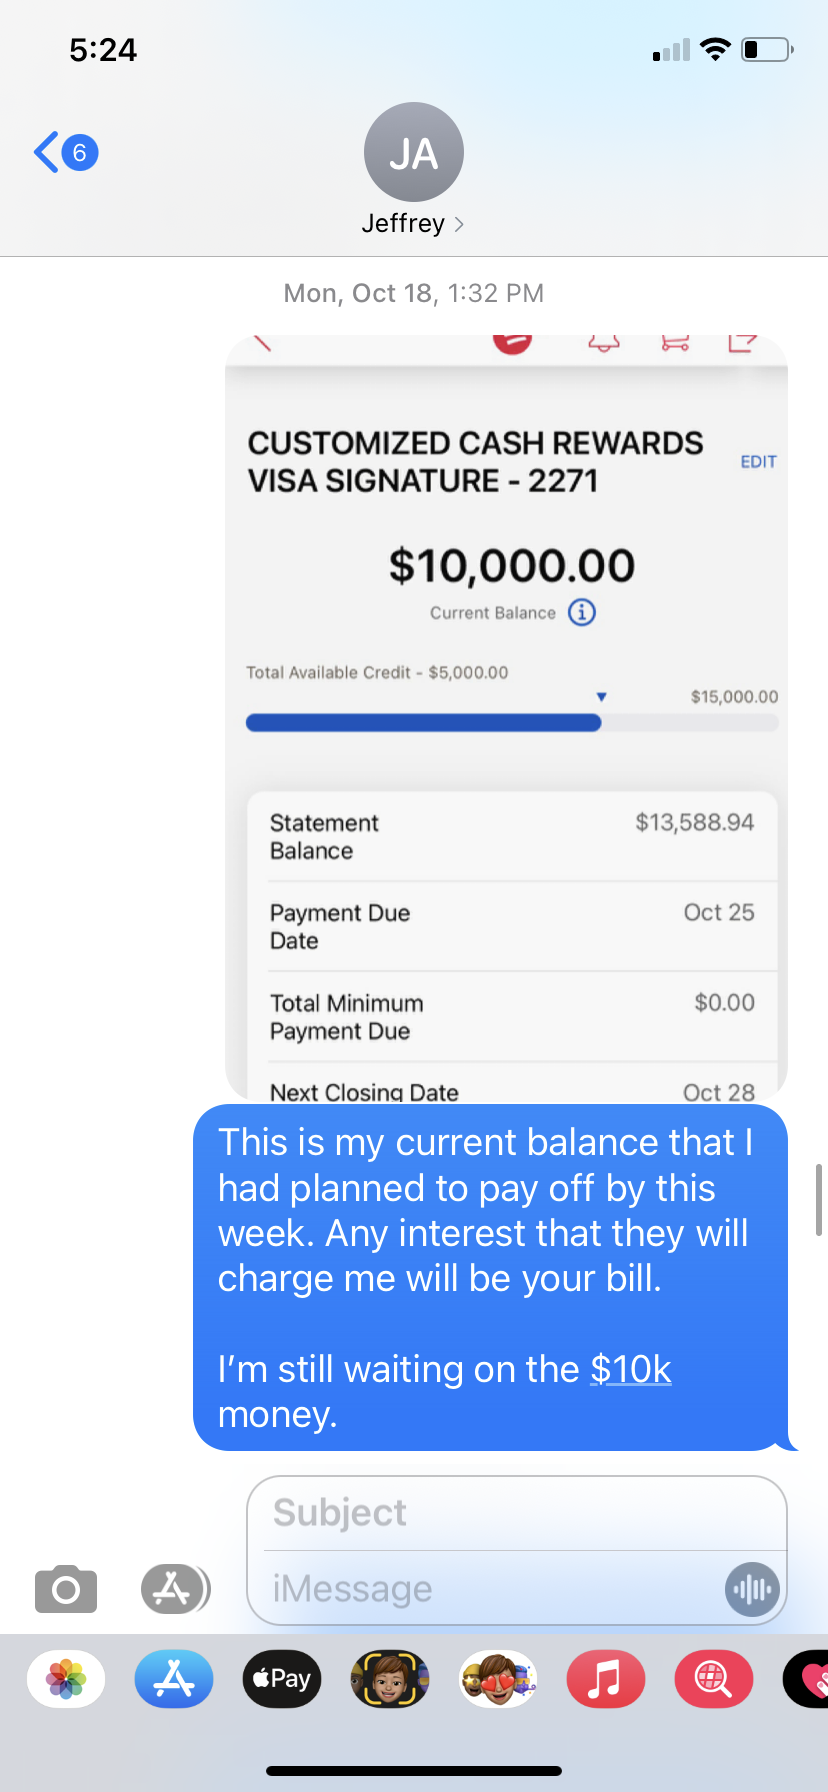 Asking to pay interest